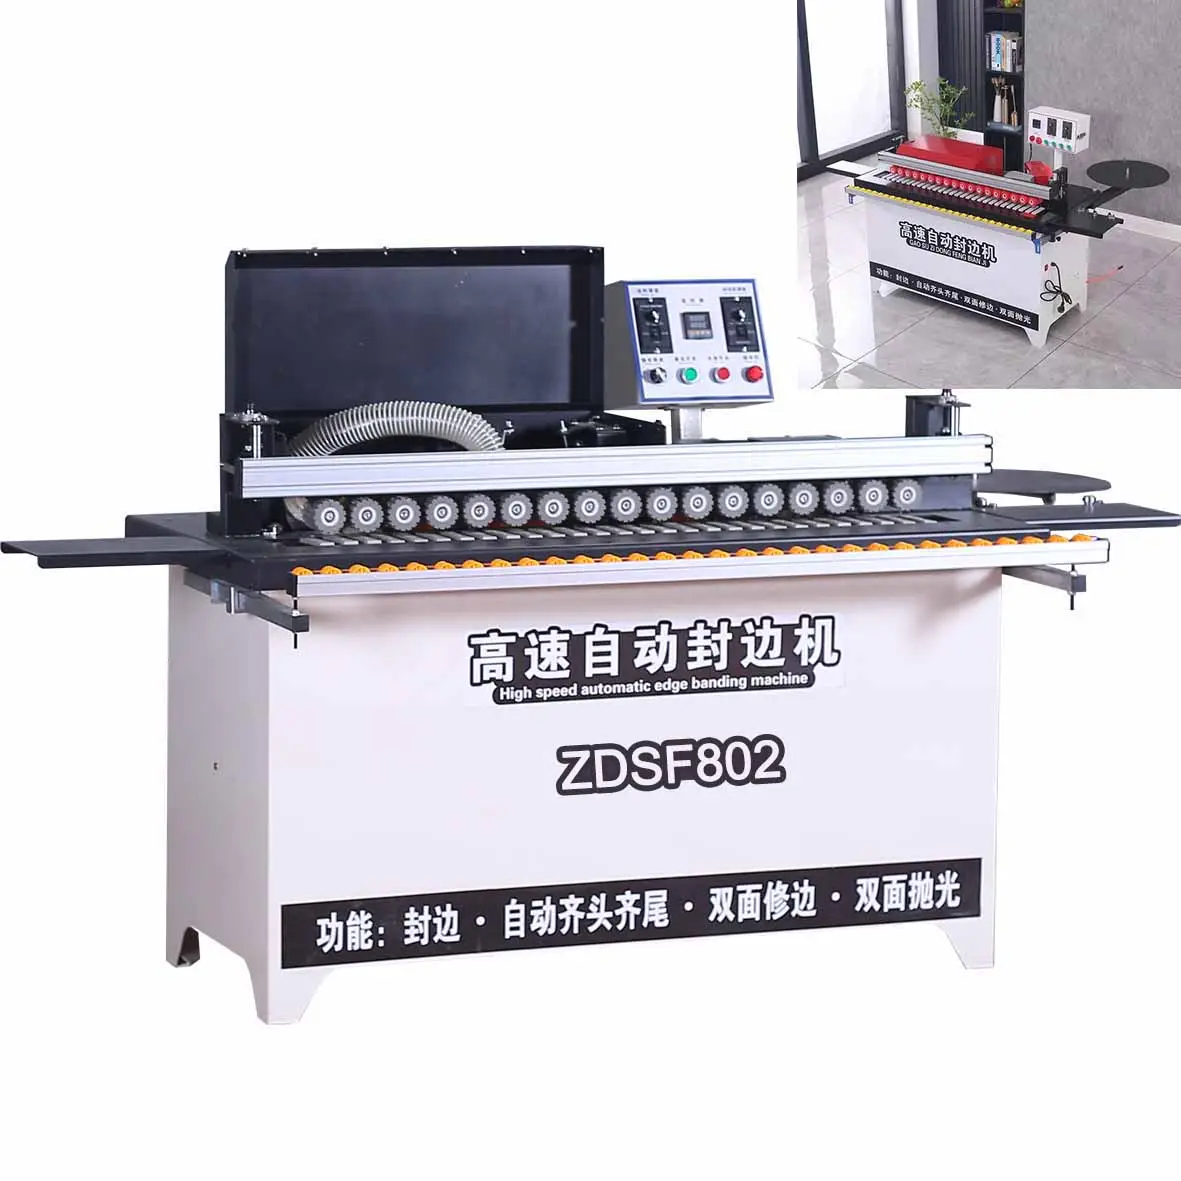 New Design ZDS802 Automatic Electric 45 Degree Portable Small Edge Bander Pvc Wood Edge Banding Machine